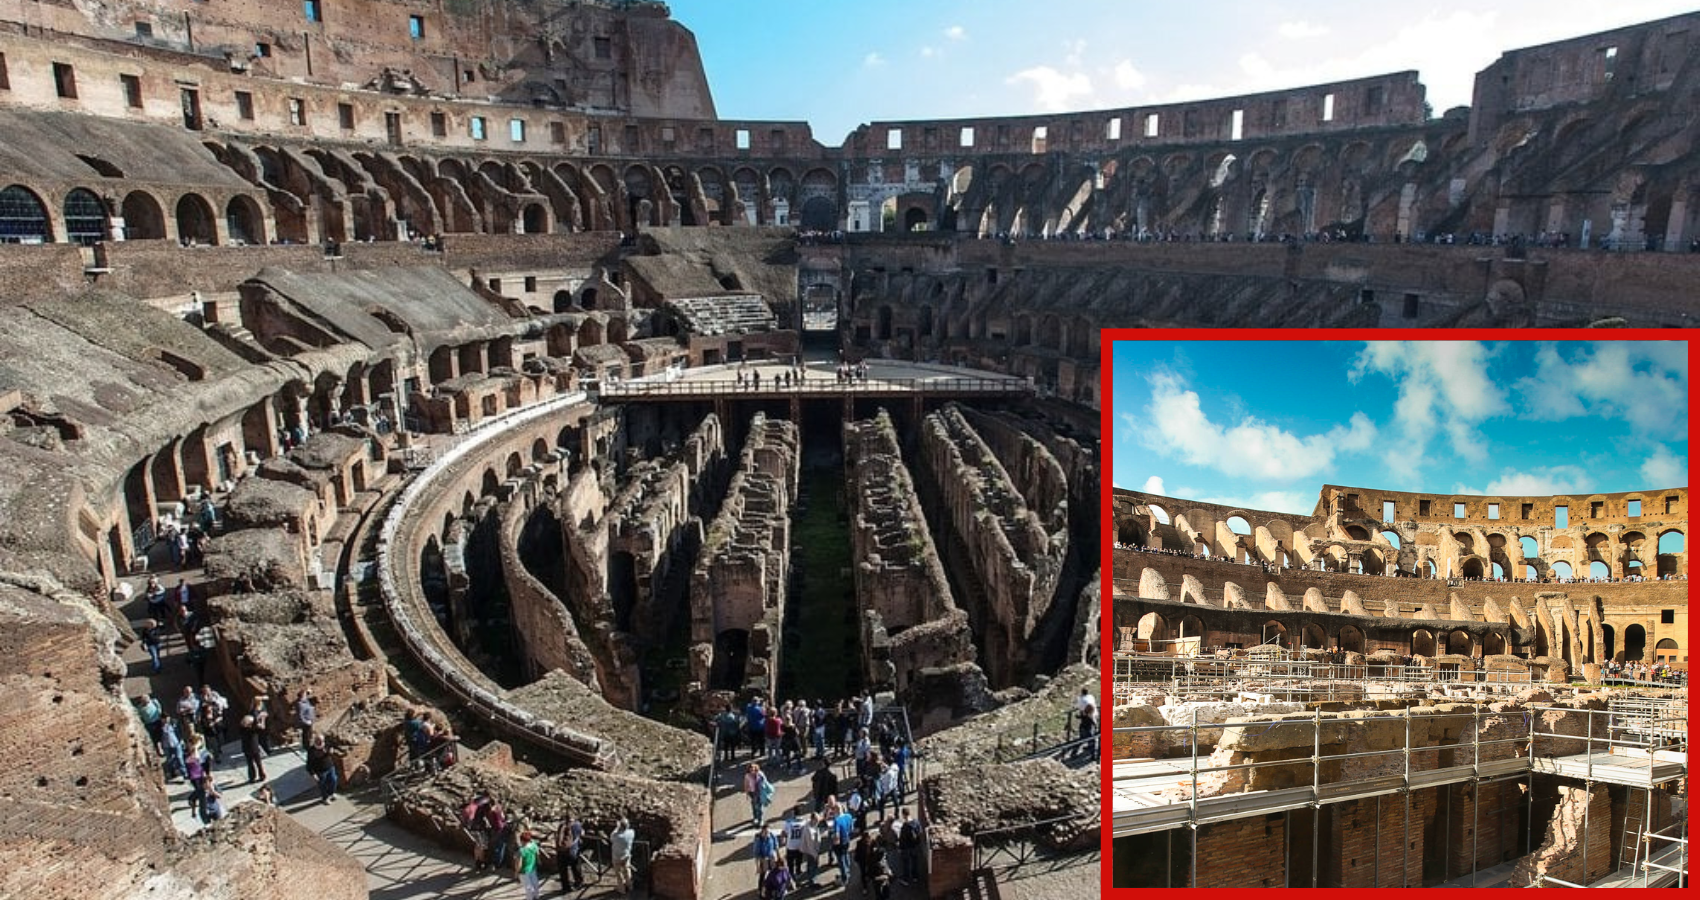 Archaeologists Find 1,900-Year-Old Snacks in Sewers Beneath the Colosseum